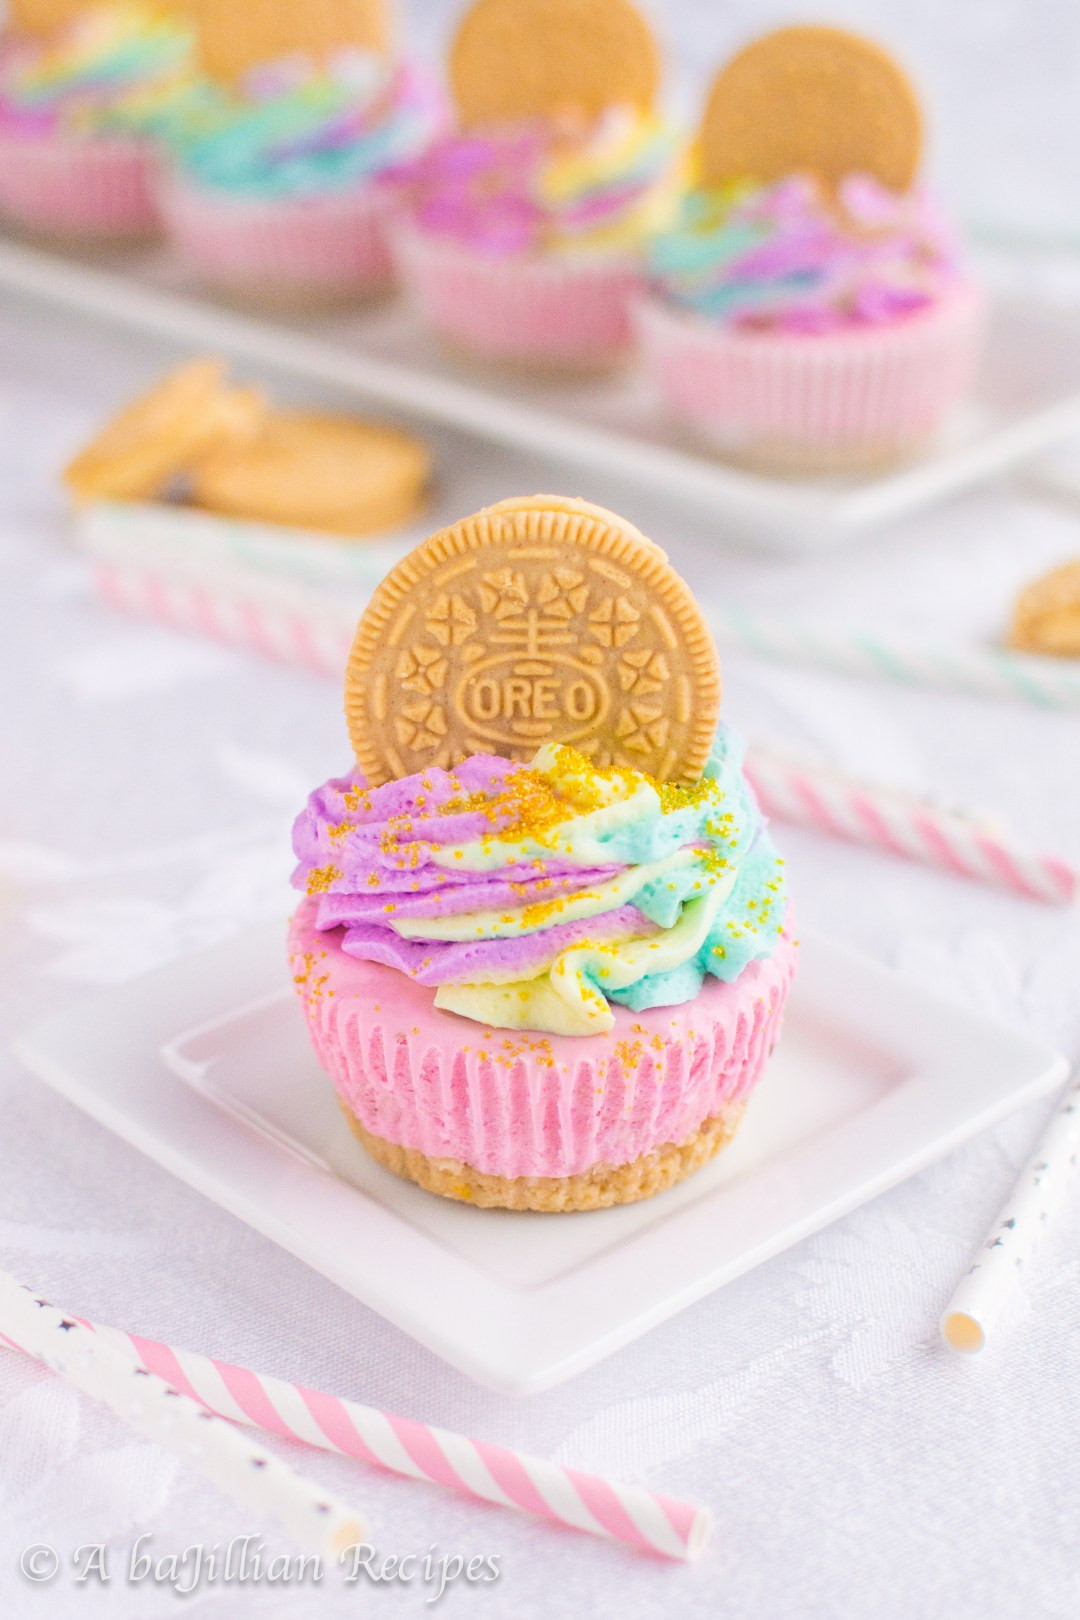 Unicorn Party Ideas Food
 Totally Perfect Unicorn Party Food Ideas